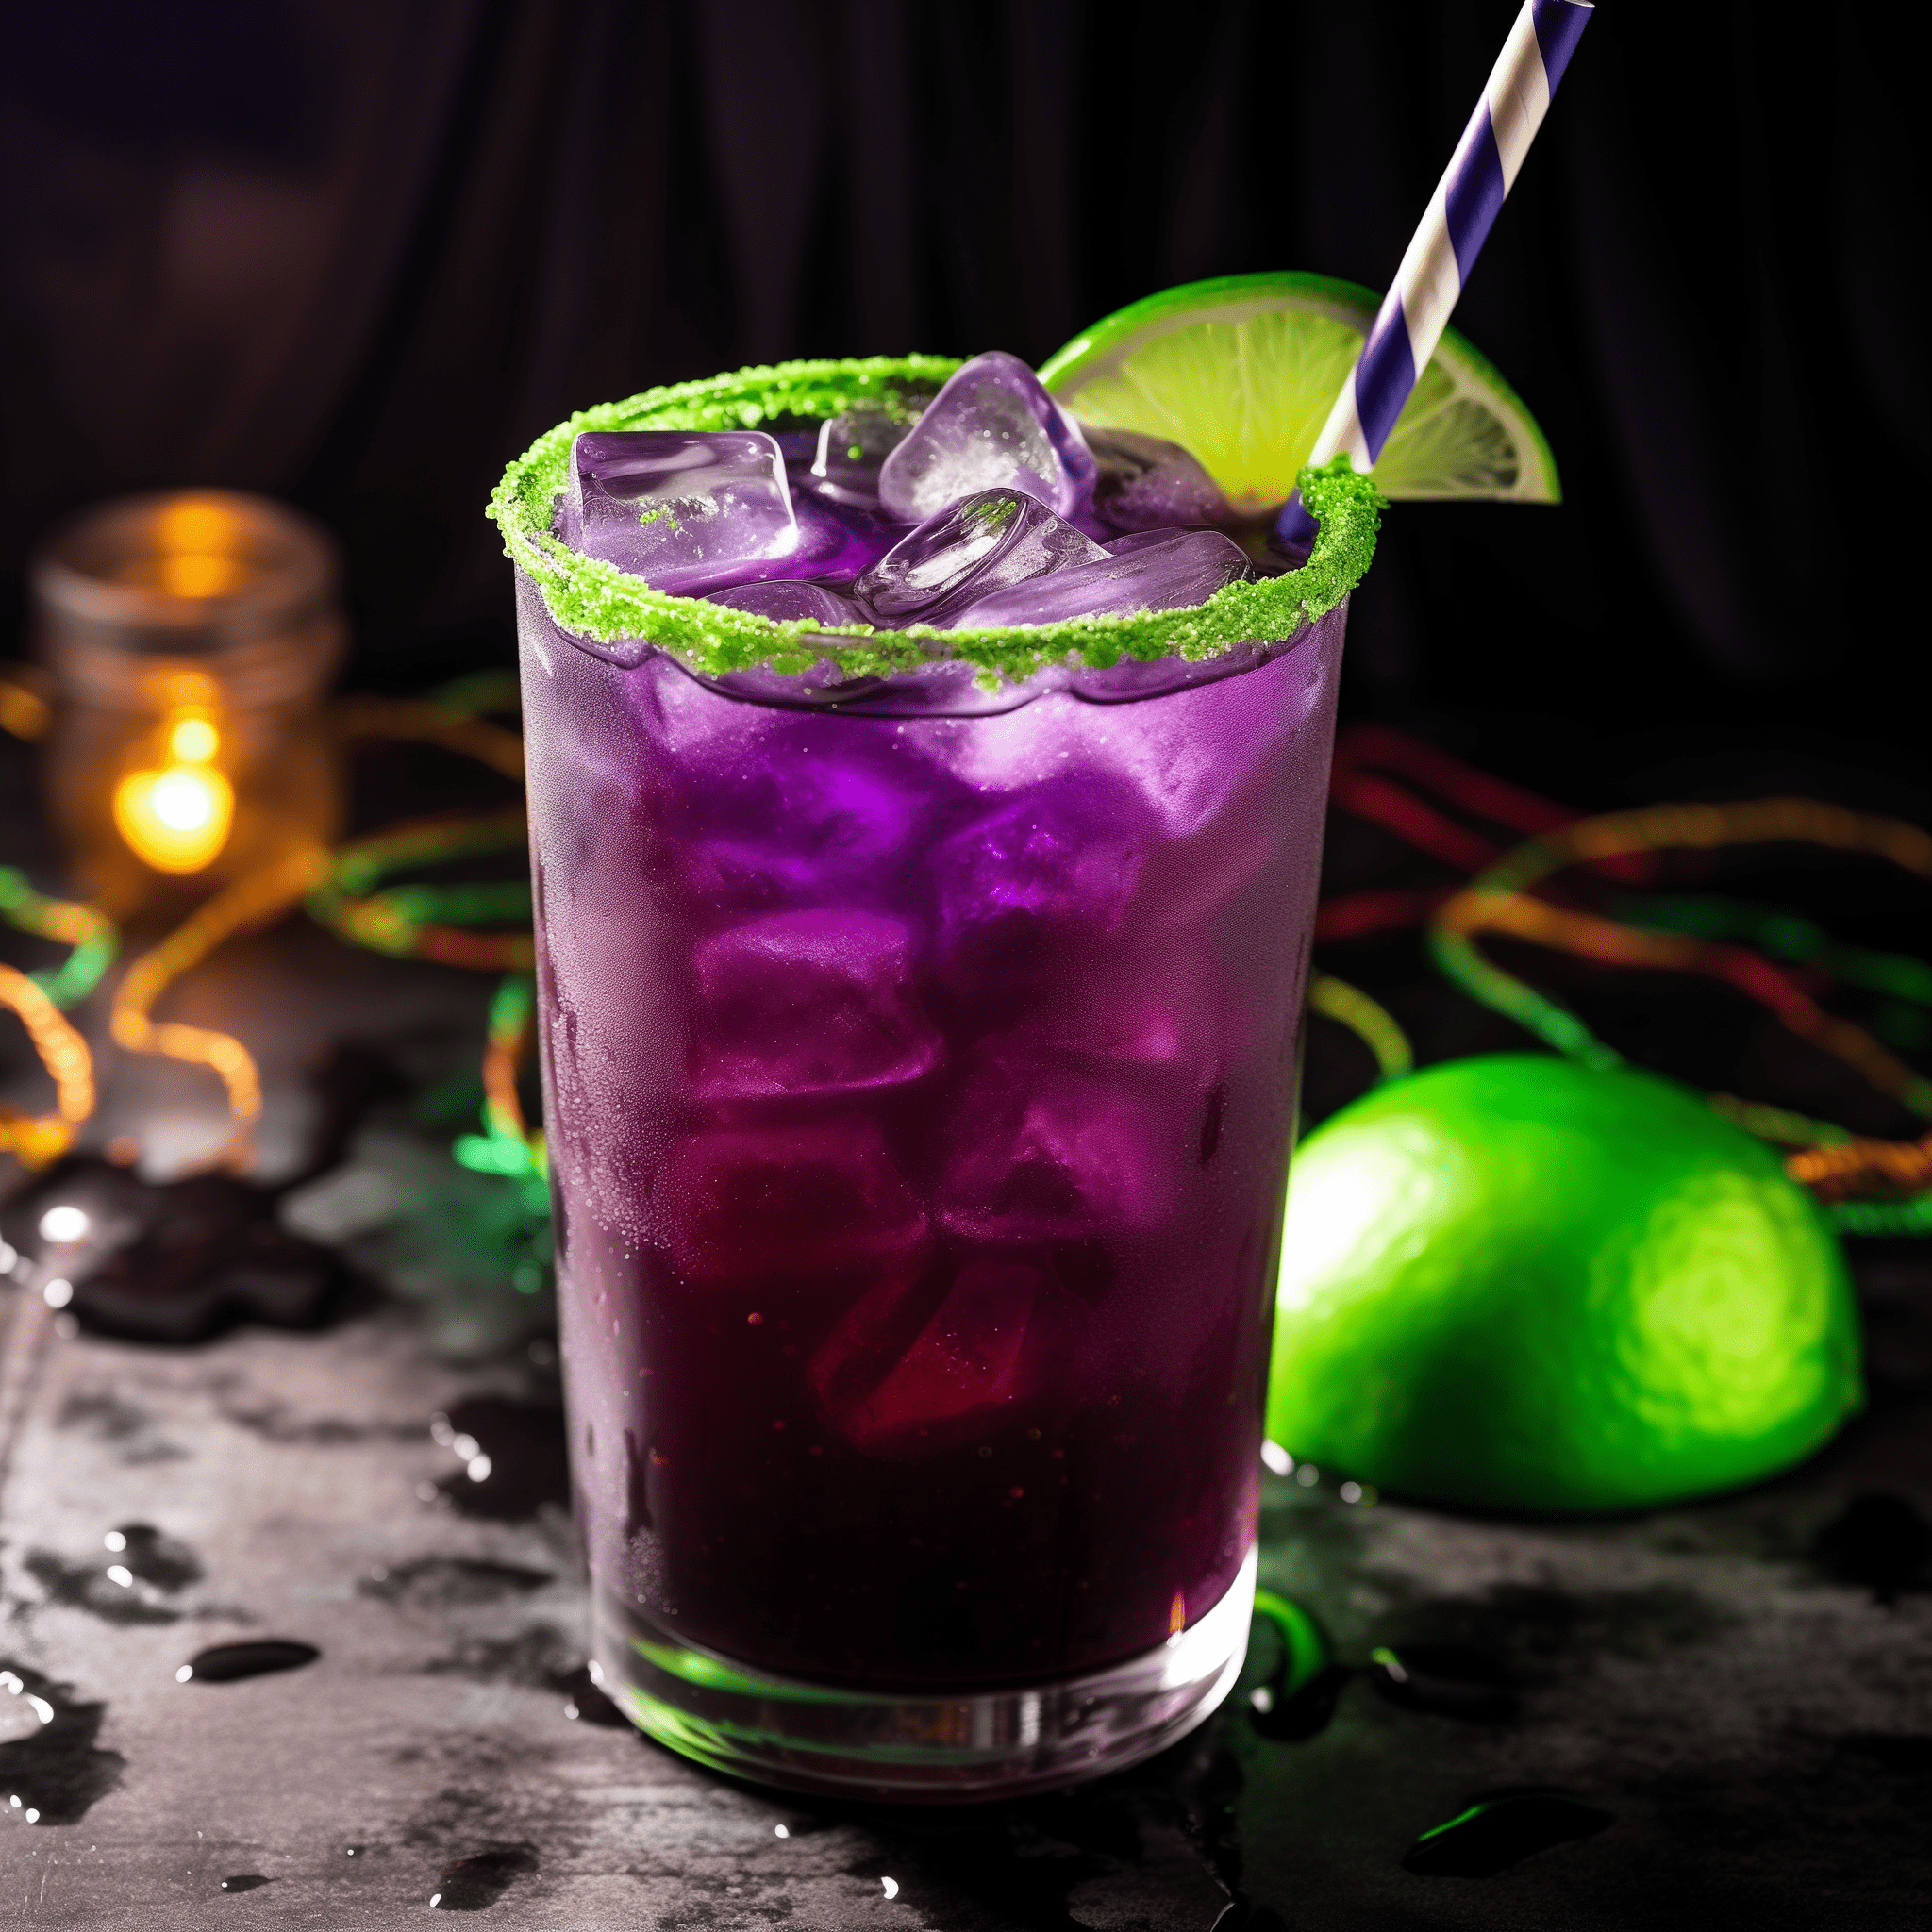 Drunk Witch Cocktail Recipe - The Drunk Witch offers a tantalizingly sweet and fruity flavor profile with a slight tanginess from the citrus. The effervescence of the Sprite adds a refreshing fizz that balances the syrupy grenadine and the potent kick of vodka.